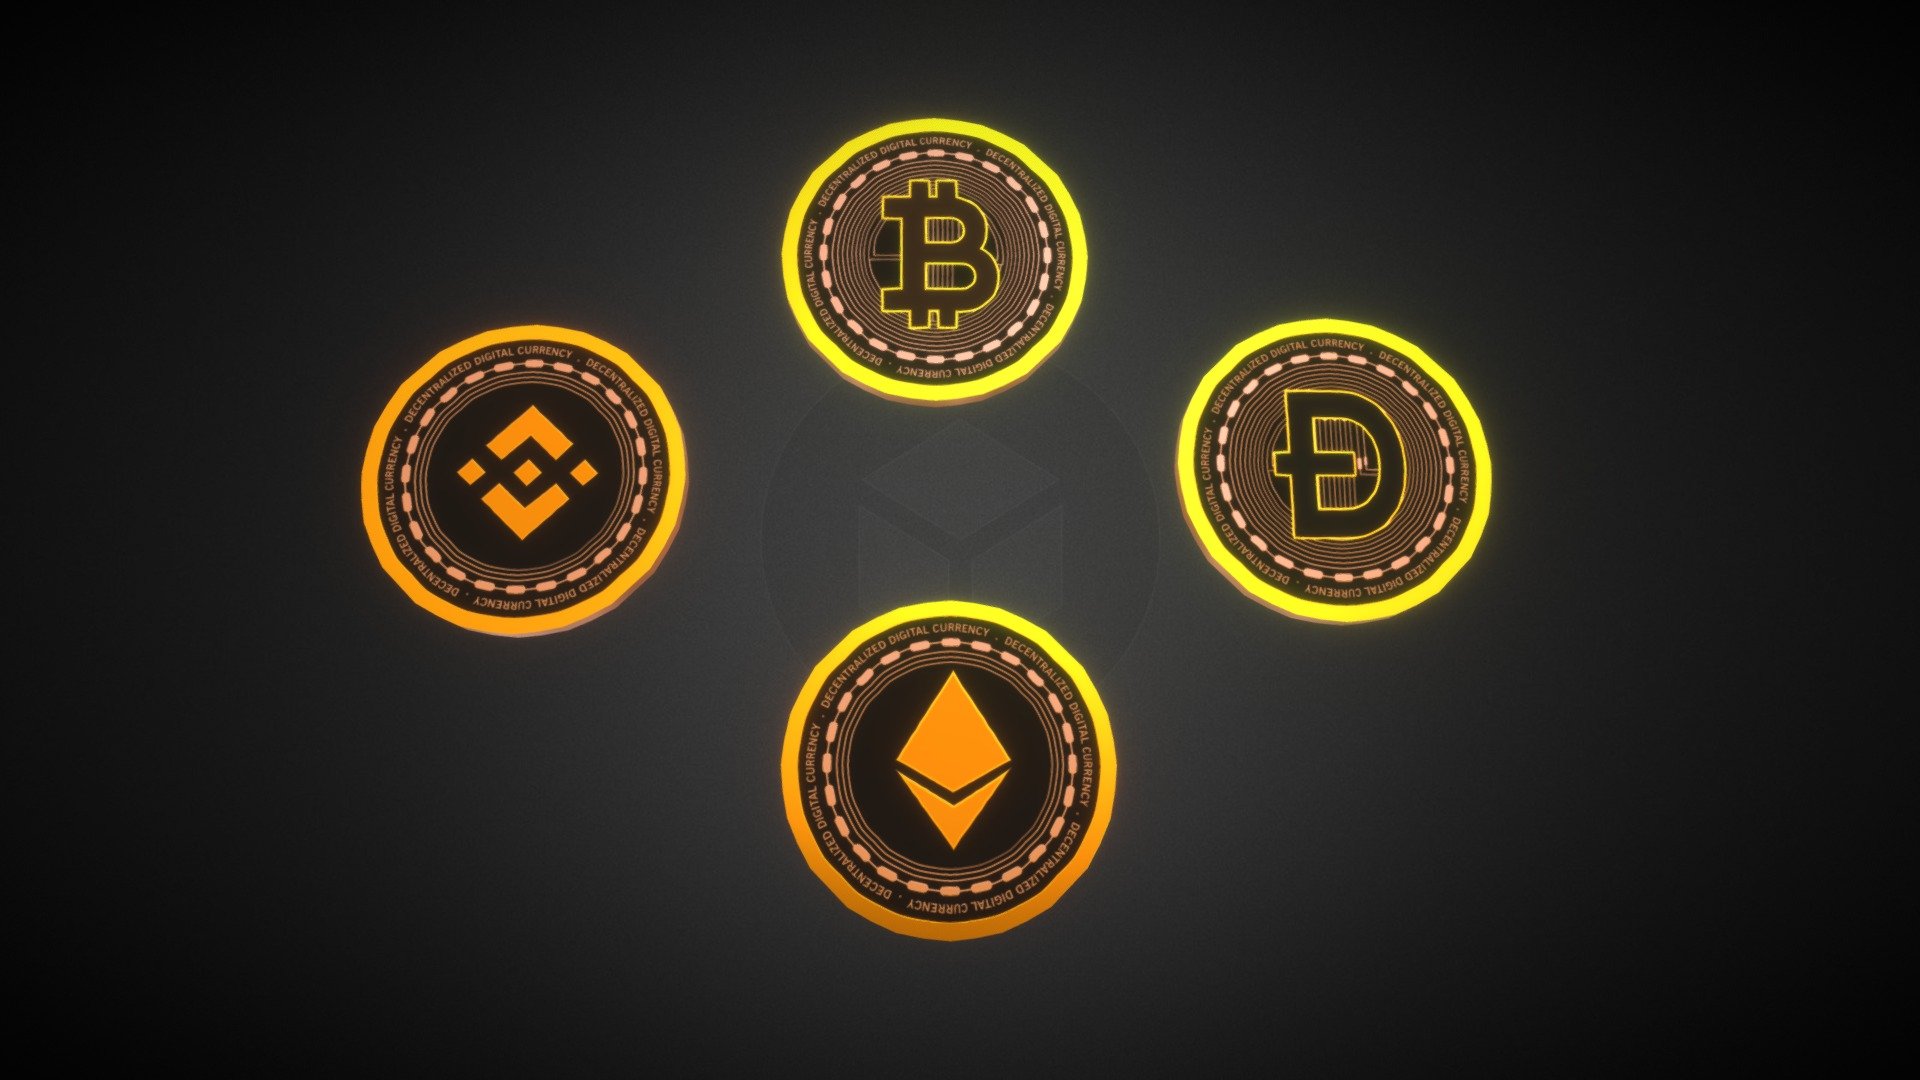 Lowpoly game ready crypto currency coins.Includes Bitcoin, Ethereum, Binance coin, Dogeecoin.
Poly count : 160
Textures : 4K - Crypto currency Coins - Buy Royalty Free 3D model by Arjun S R (@SRstudiosKerala) 3d model